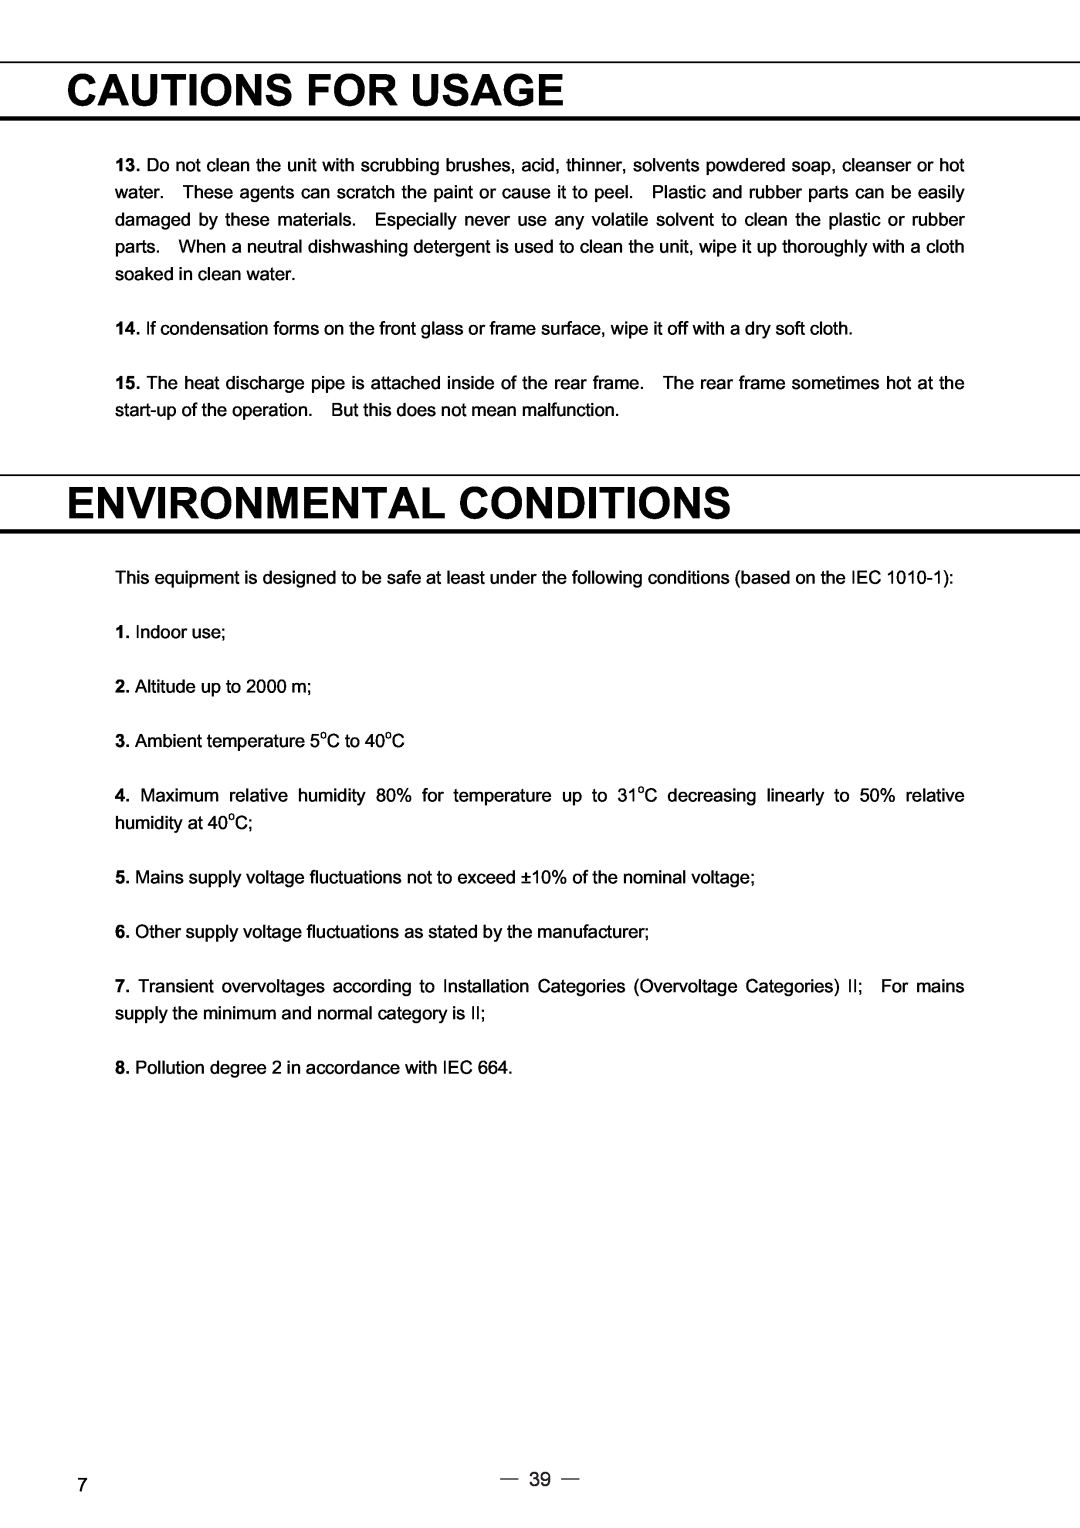 Sanyo MPR-414FS instruction manual Environmental Conditions, Cautions For Usage, Indoor use 2. Altitude up to 2000 m 